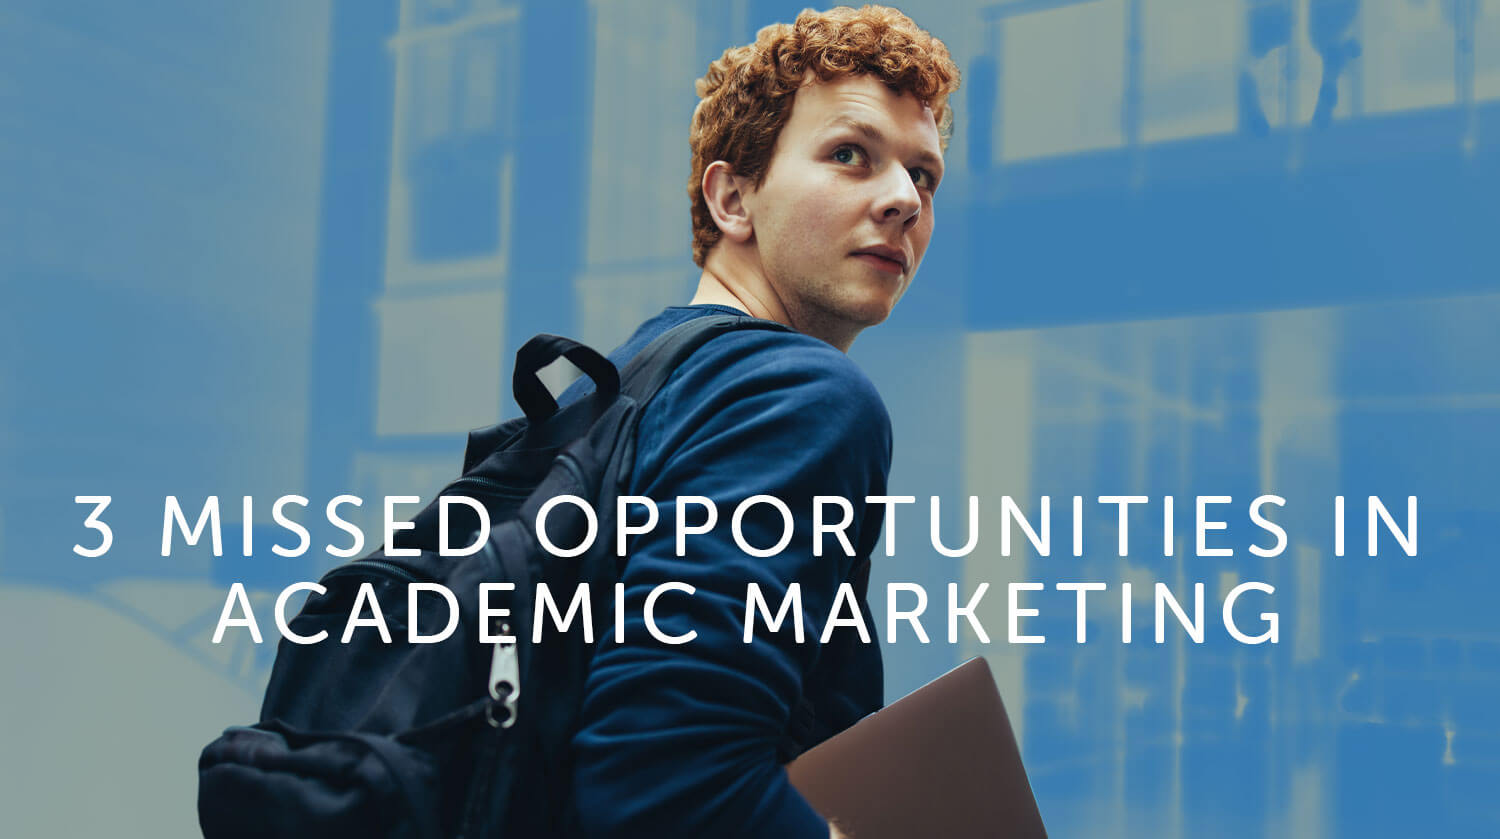 3 Missed Opportunities in Academic Marketing